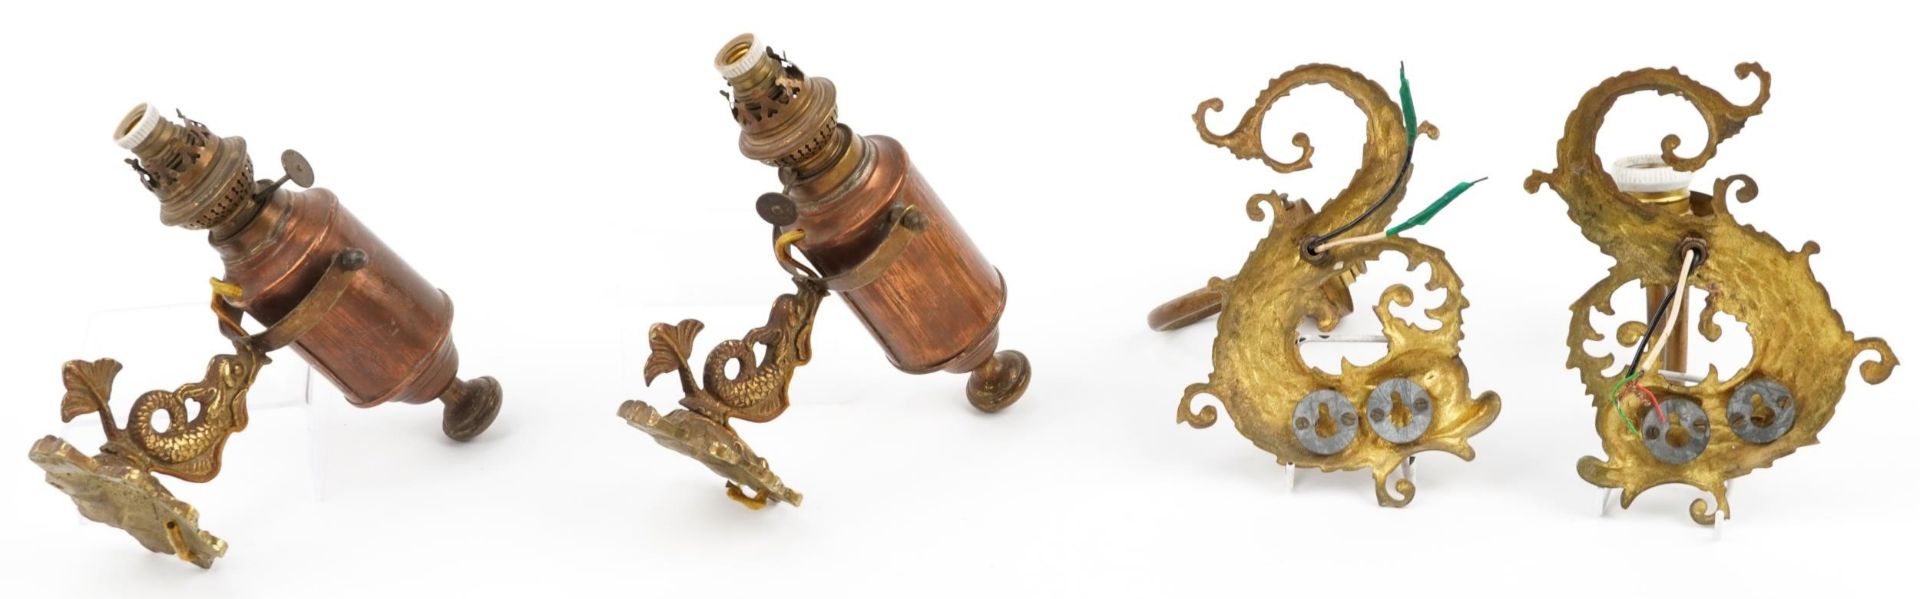 Two pairs of 19th century style brass seahorse design wall sconces including a pair with copper - Image 2 of 2